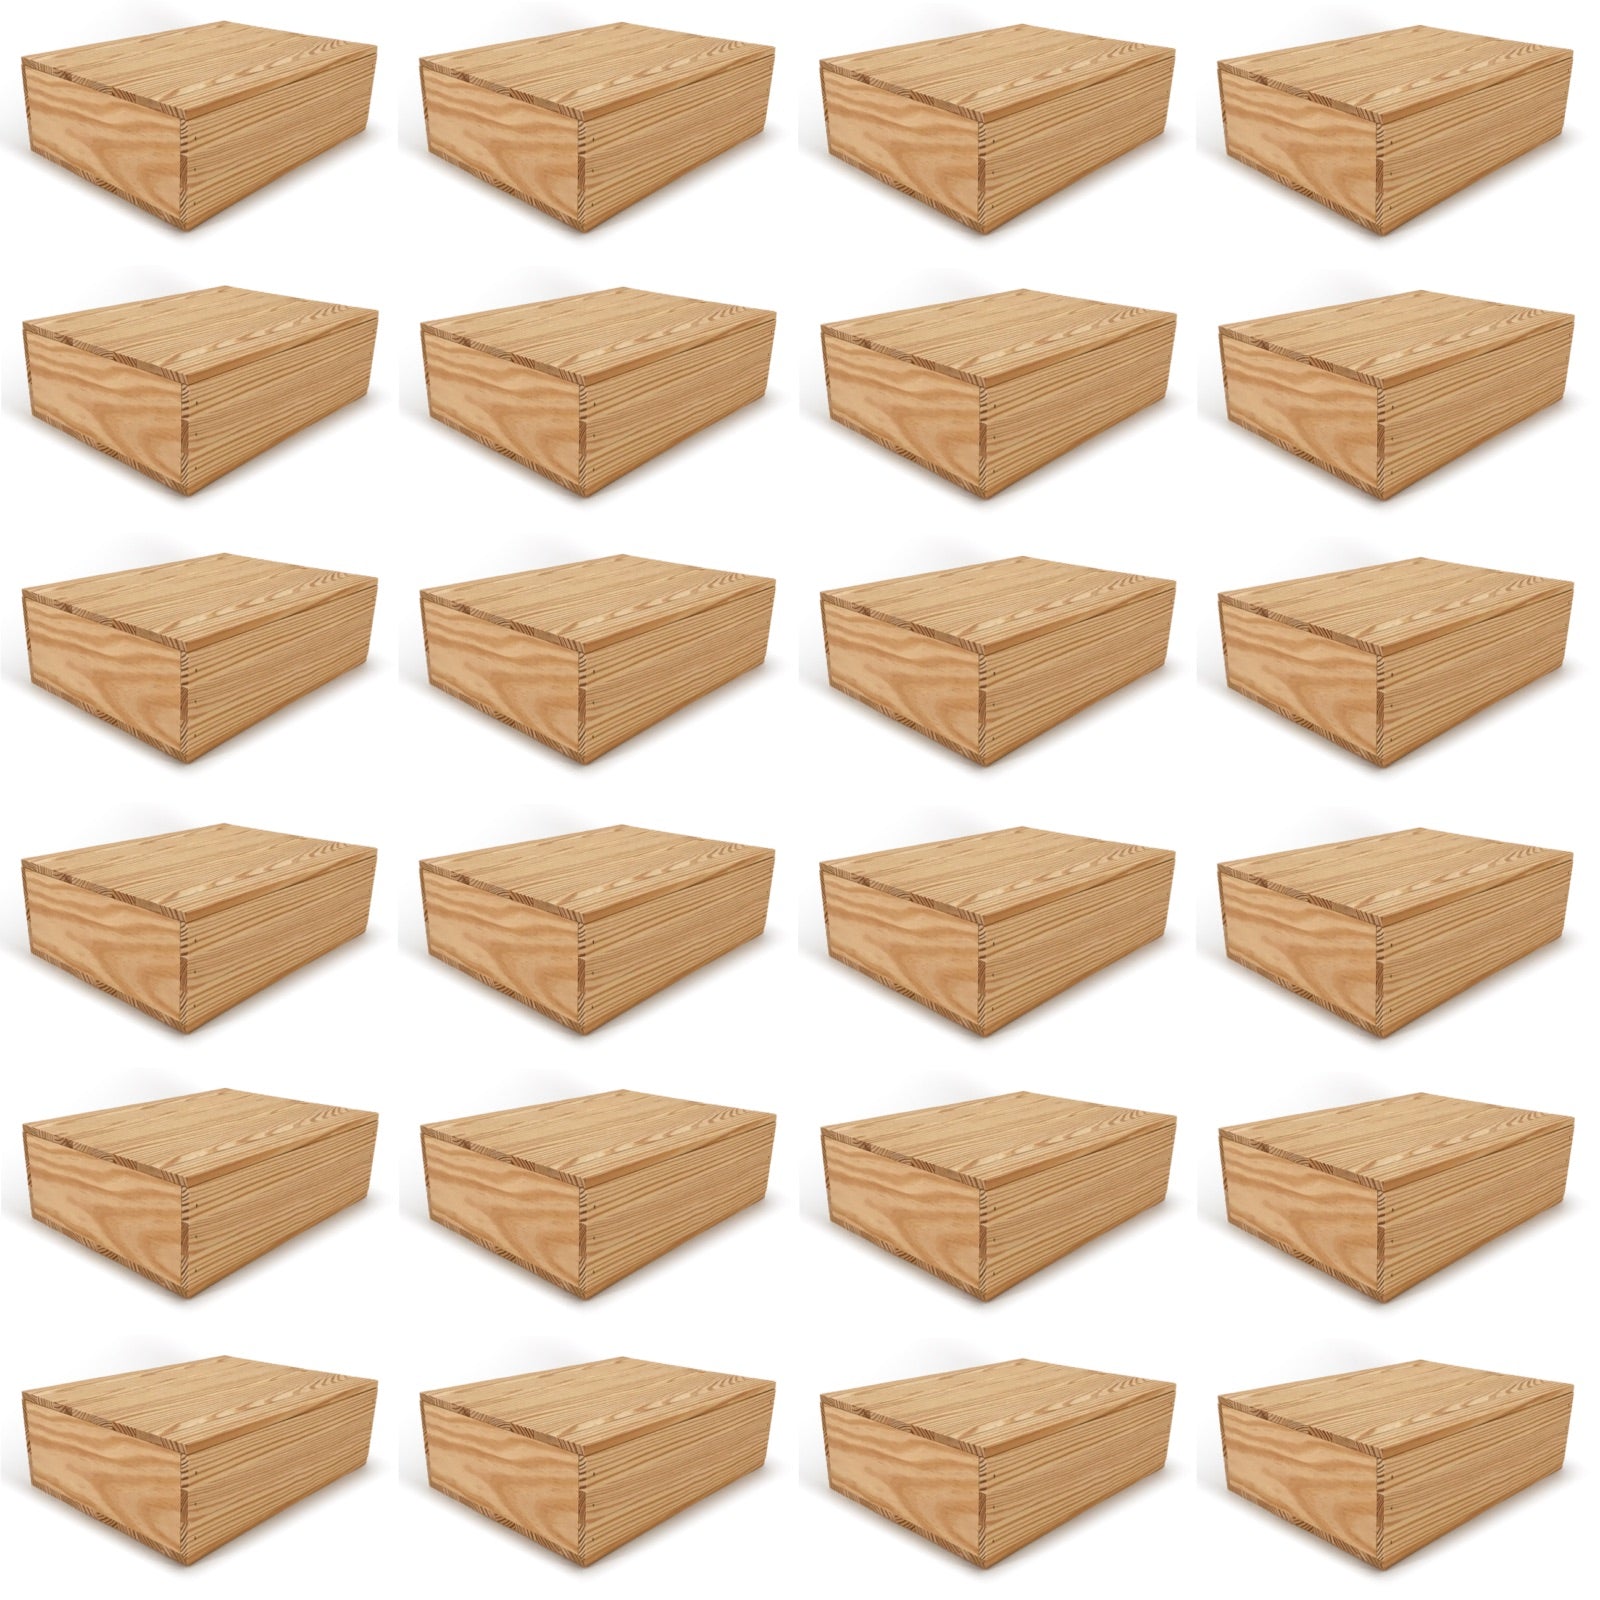 24 Small wooden crates with lid 14x10x4.25